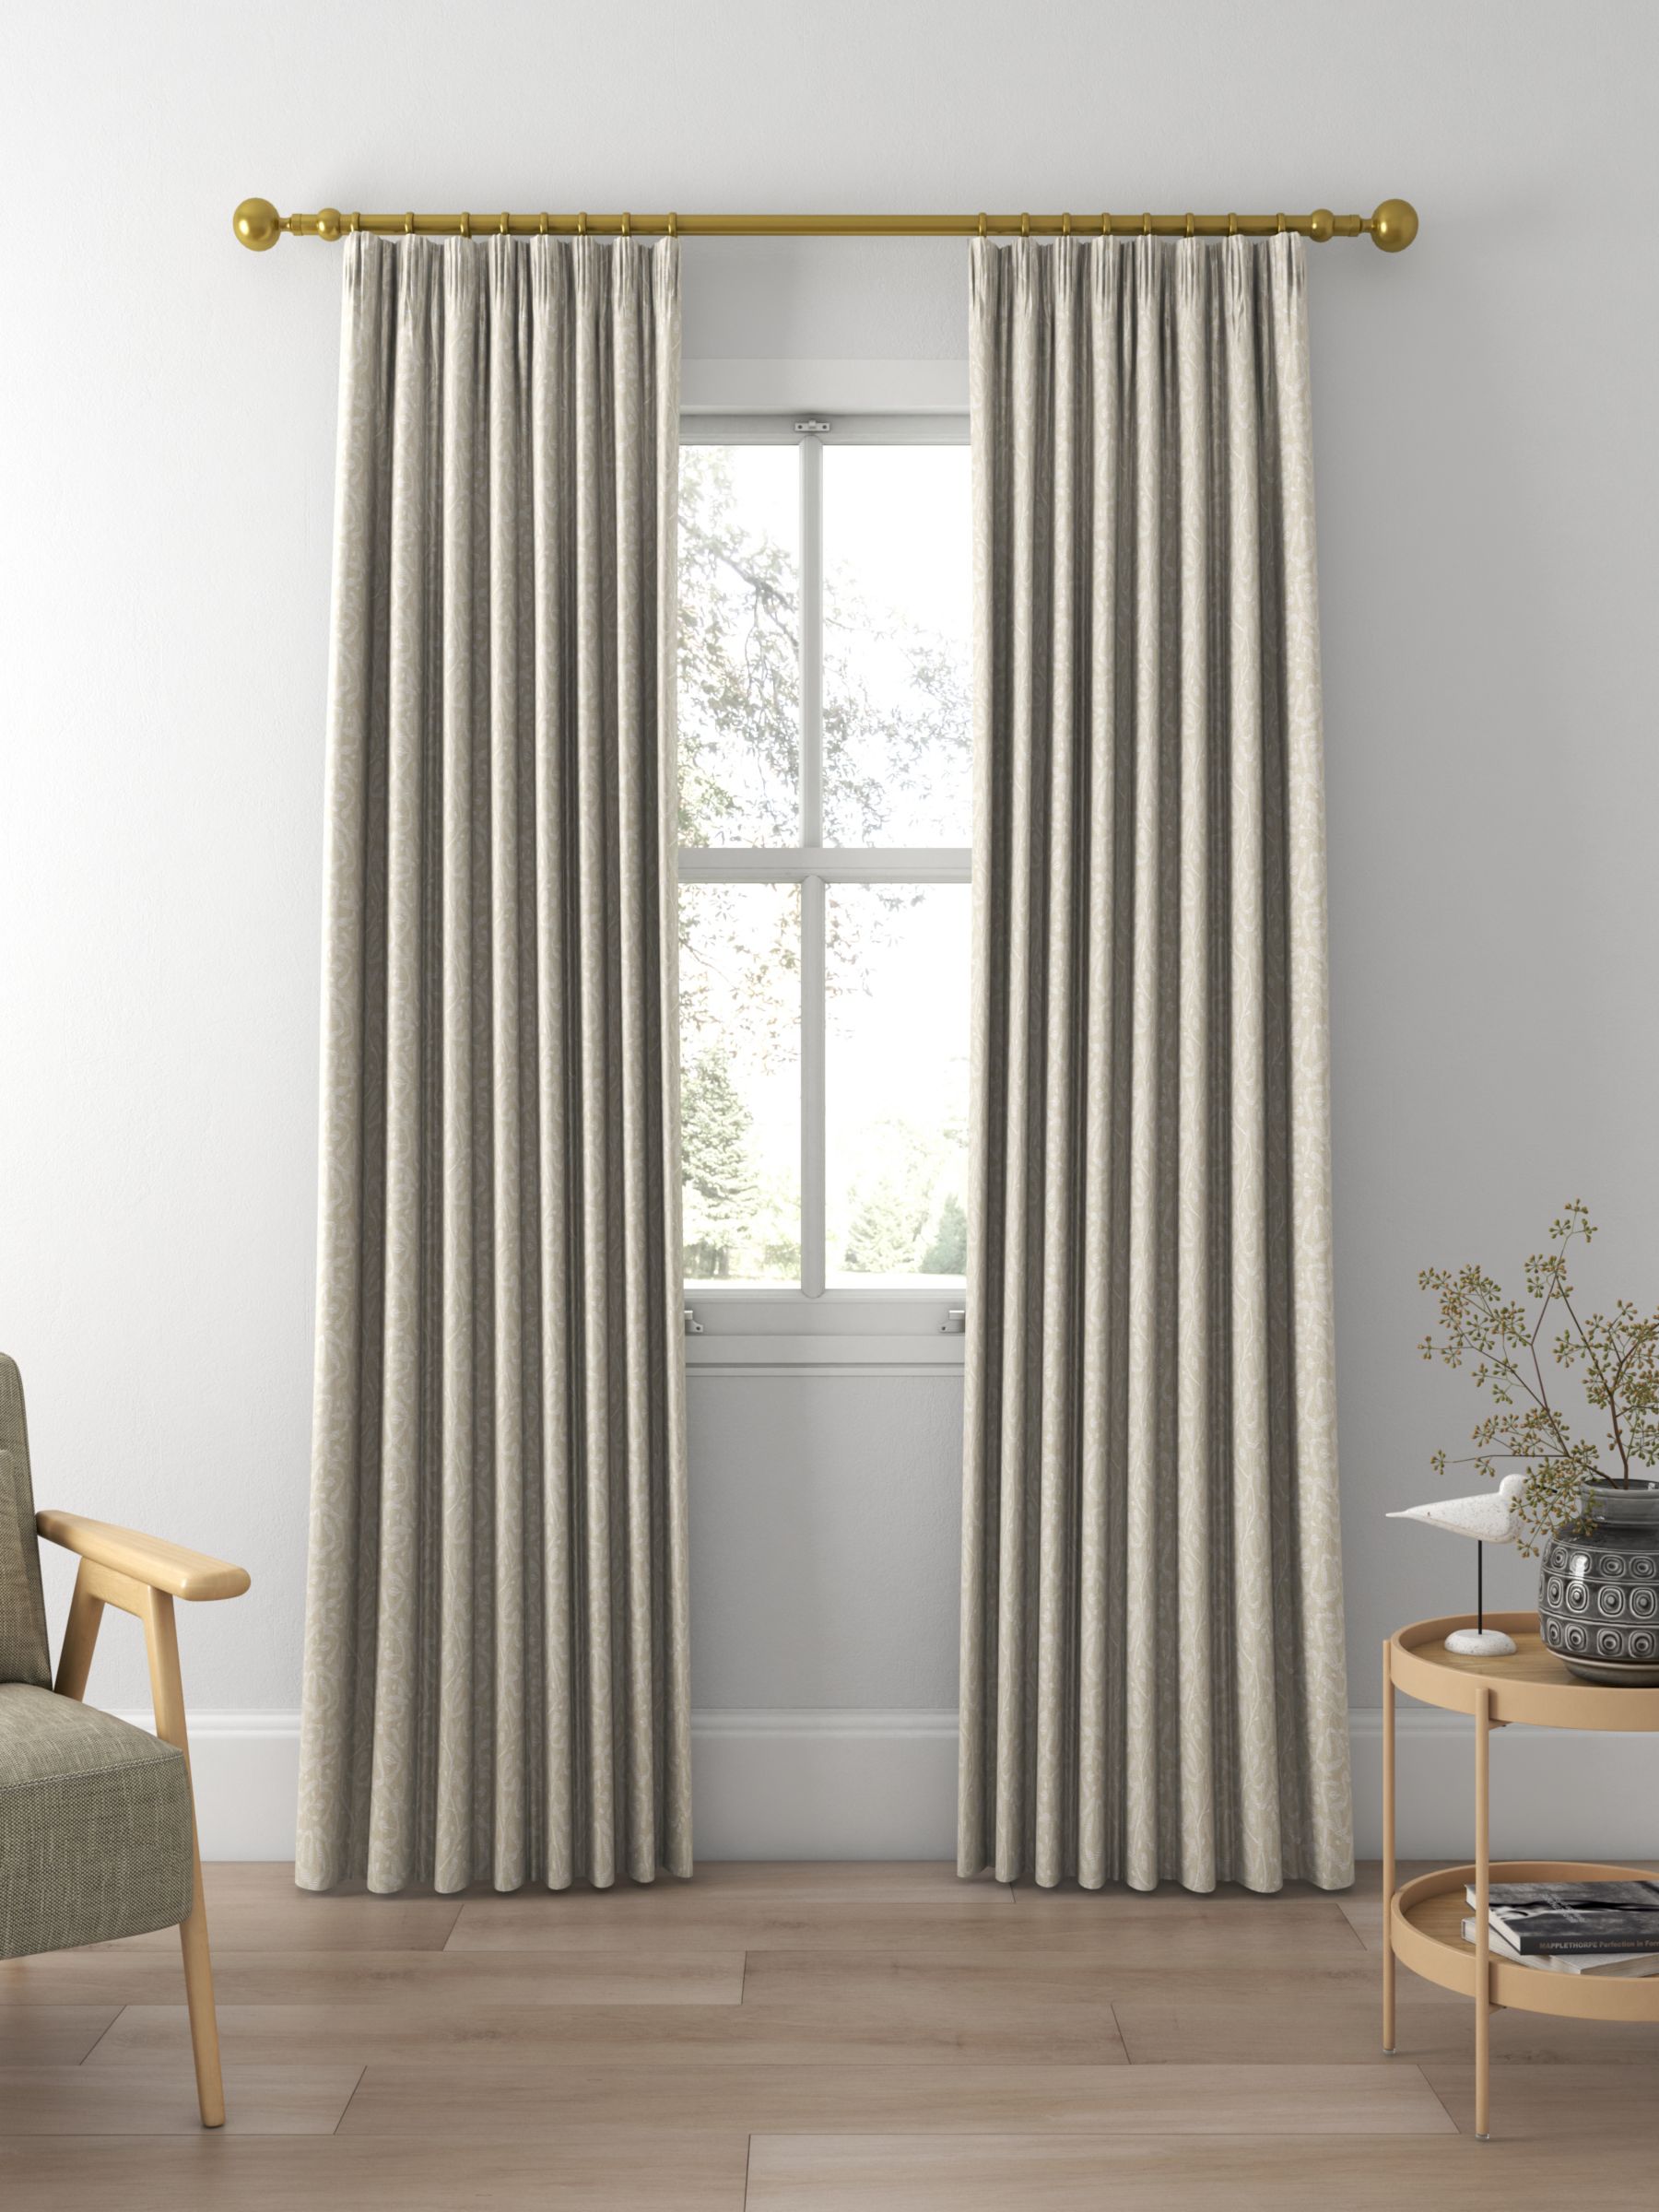 Sanderson Trailing Sycamore Made to Measure Curtains, Linen